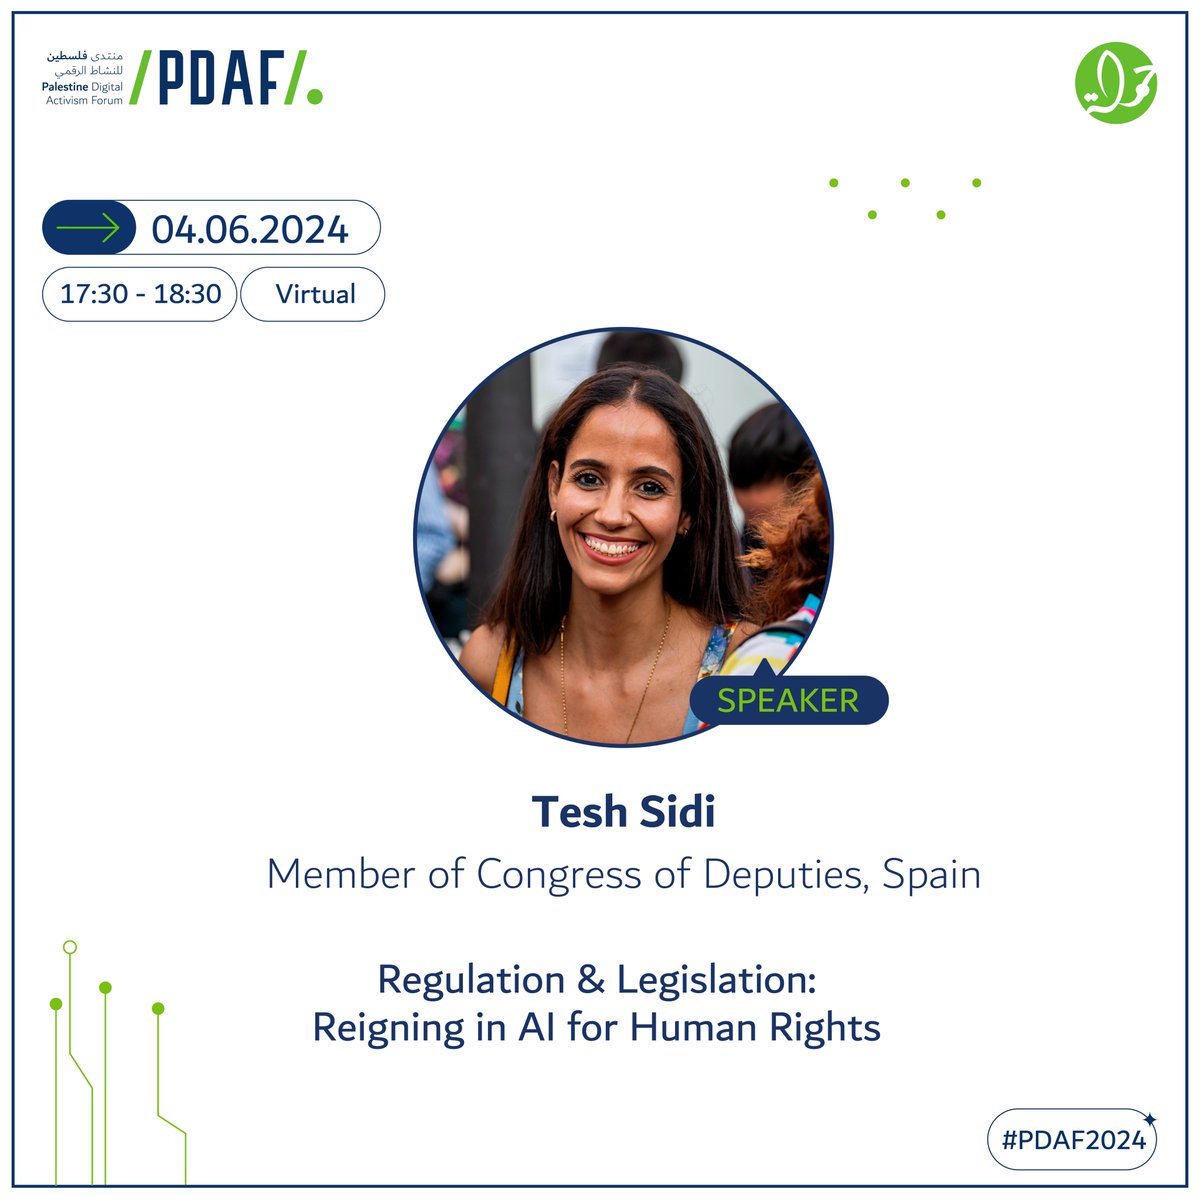 📢Join @teshsidi, one of the speakers in the session: “Regulation & Legislation: Reigning in AI for Human Rights” Reserve your seat now: pdaf.net #PDAF2024